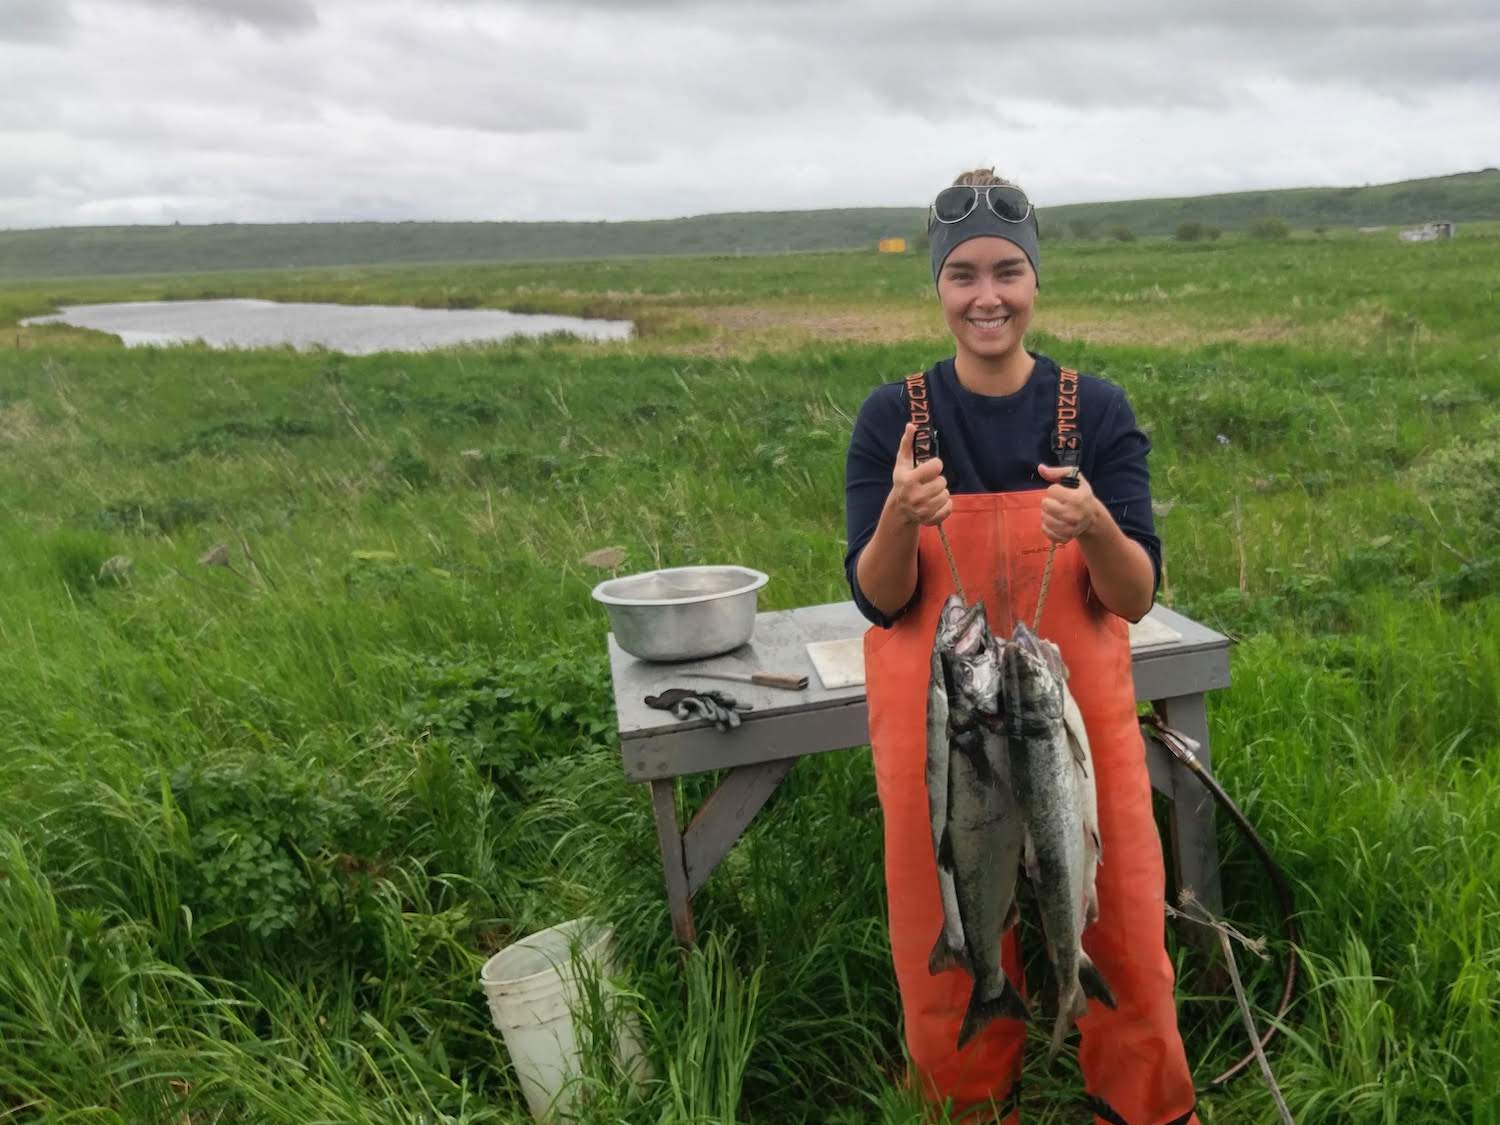 Jamie O'Connor holds up fish in a grass field, Bristol Bay May 2020